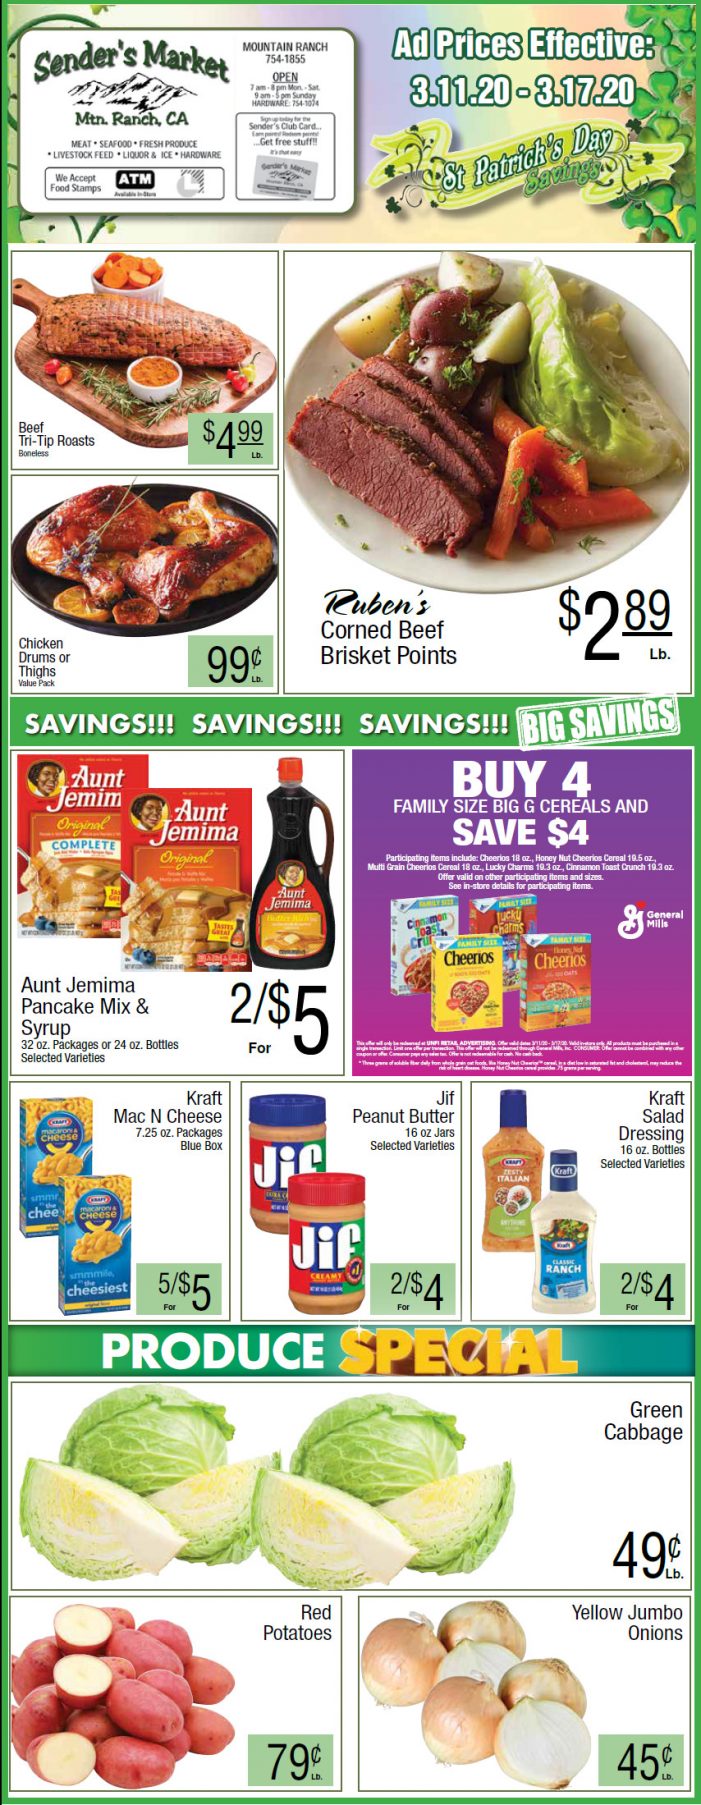 Sender’s Market’s Weekly Ad & Grocery Specials Through March 17th